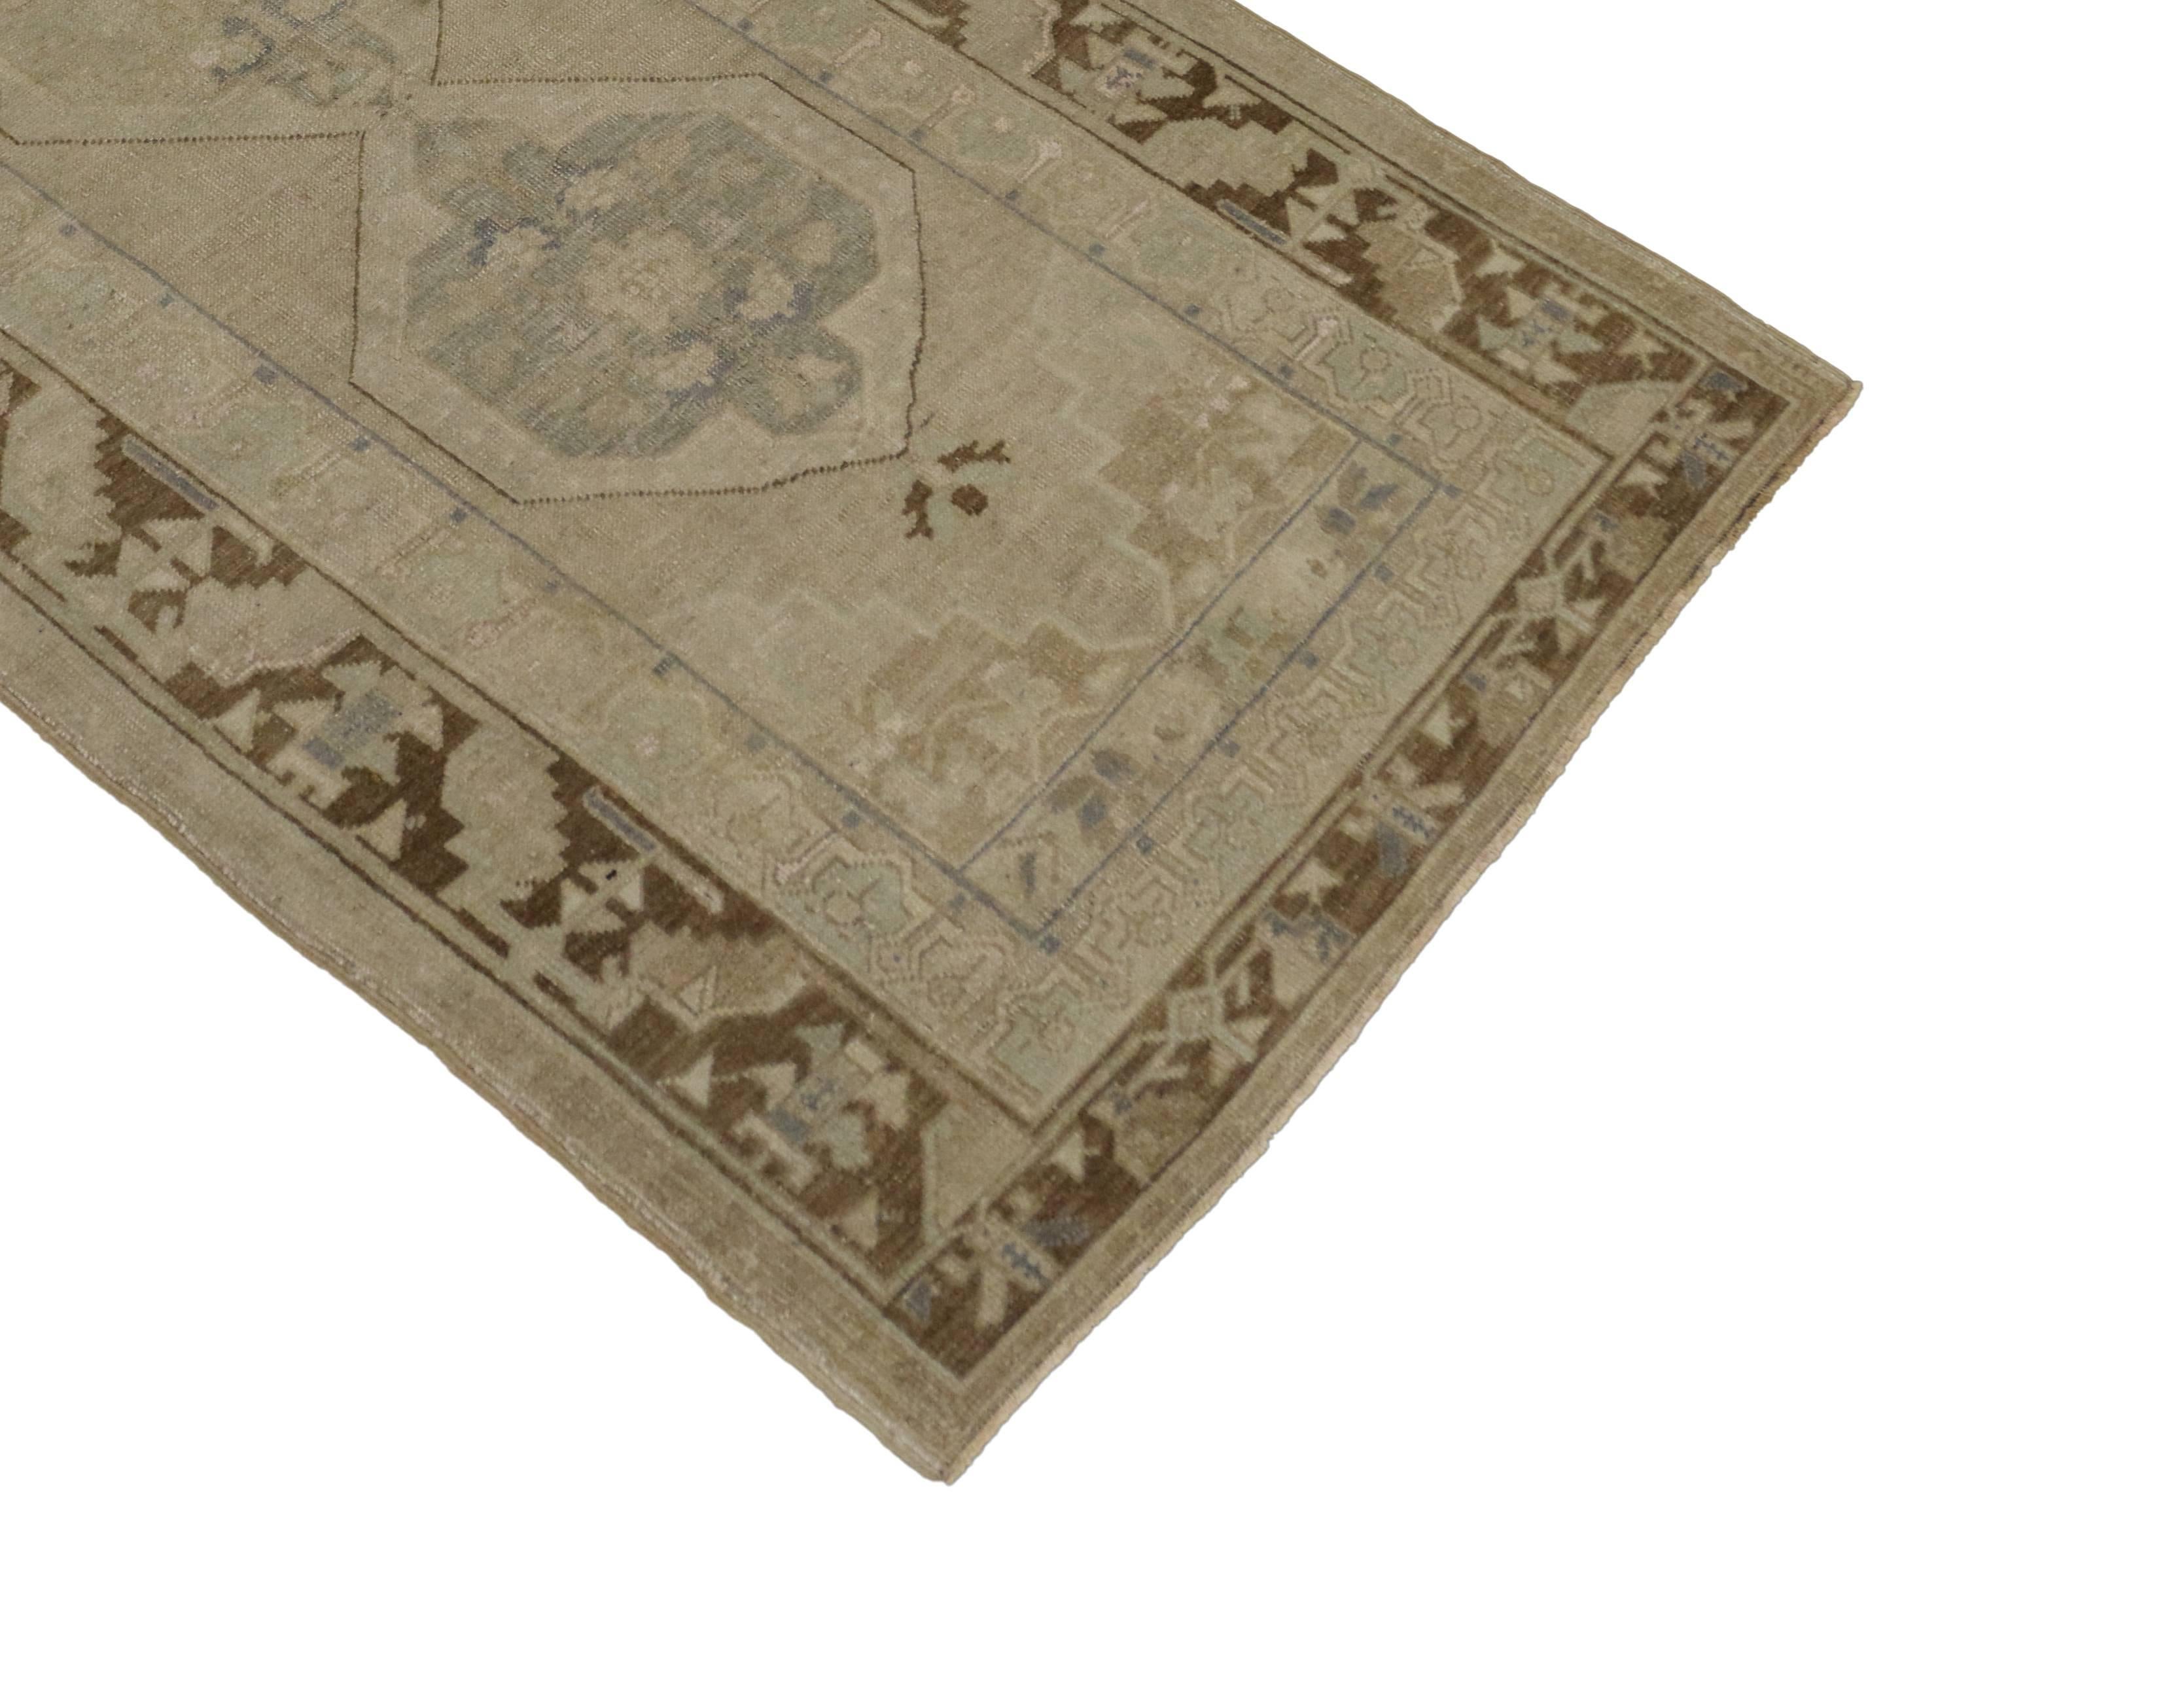 50988 Vintage Turkish Oushak runner, wide Hallway runner 04.02 X 08.08. This hand-knotted wool vintage Turkish Oushak runner features two stacked hexagonal medallions with palmette finials in an abrashed field framed by stair-step spandrels. A